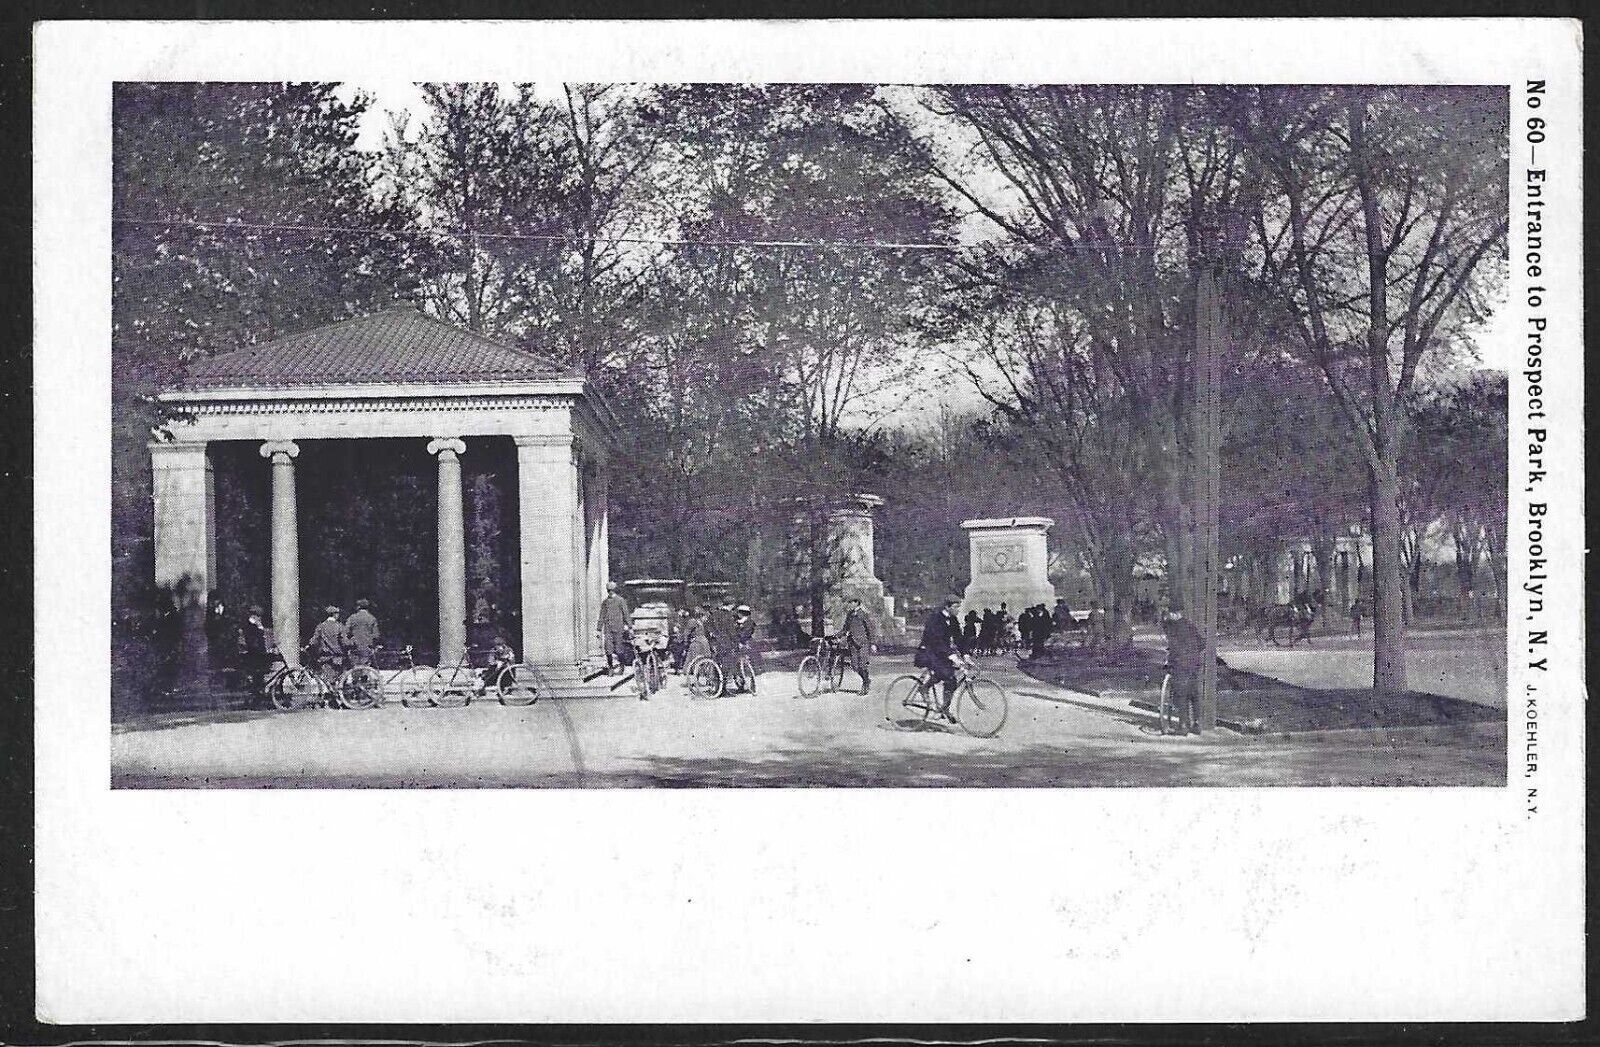 Entrance to Prospect Park, Brooklyn, New York City, N.Y., Very Early Postcard